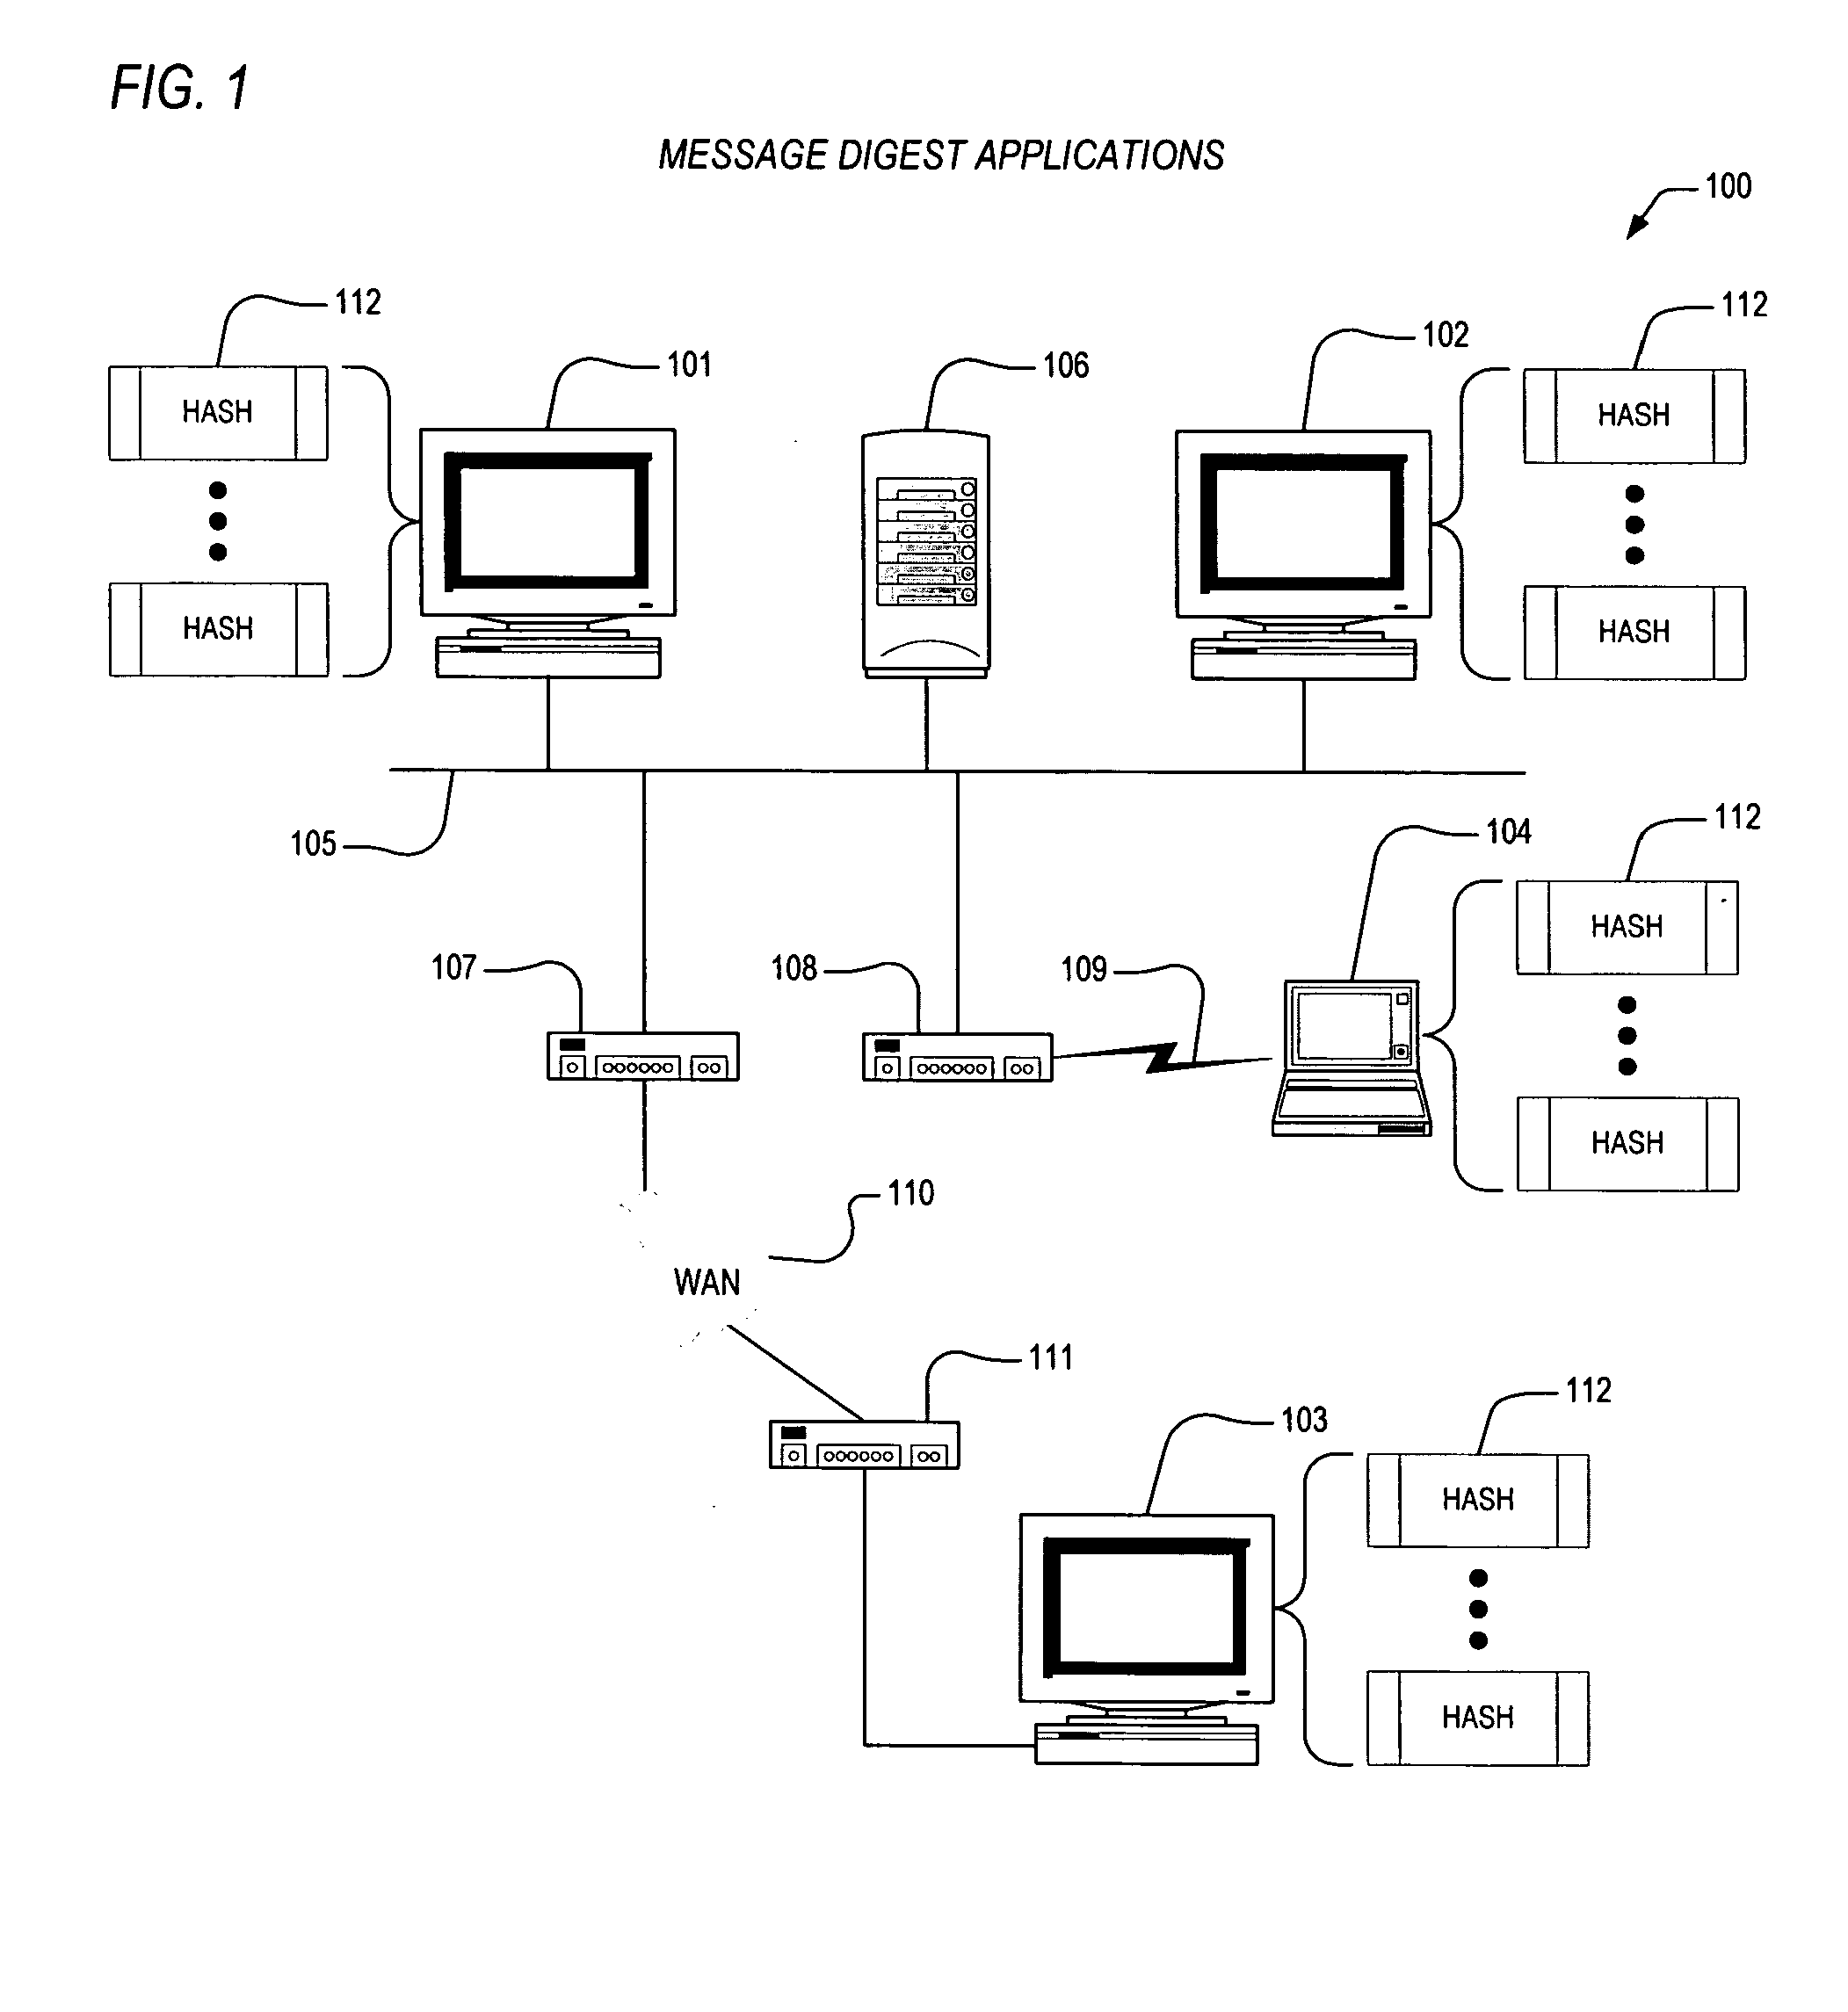 Apparatus and method for secure hash algorithm